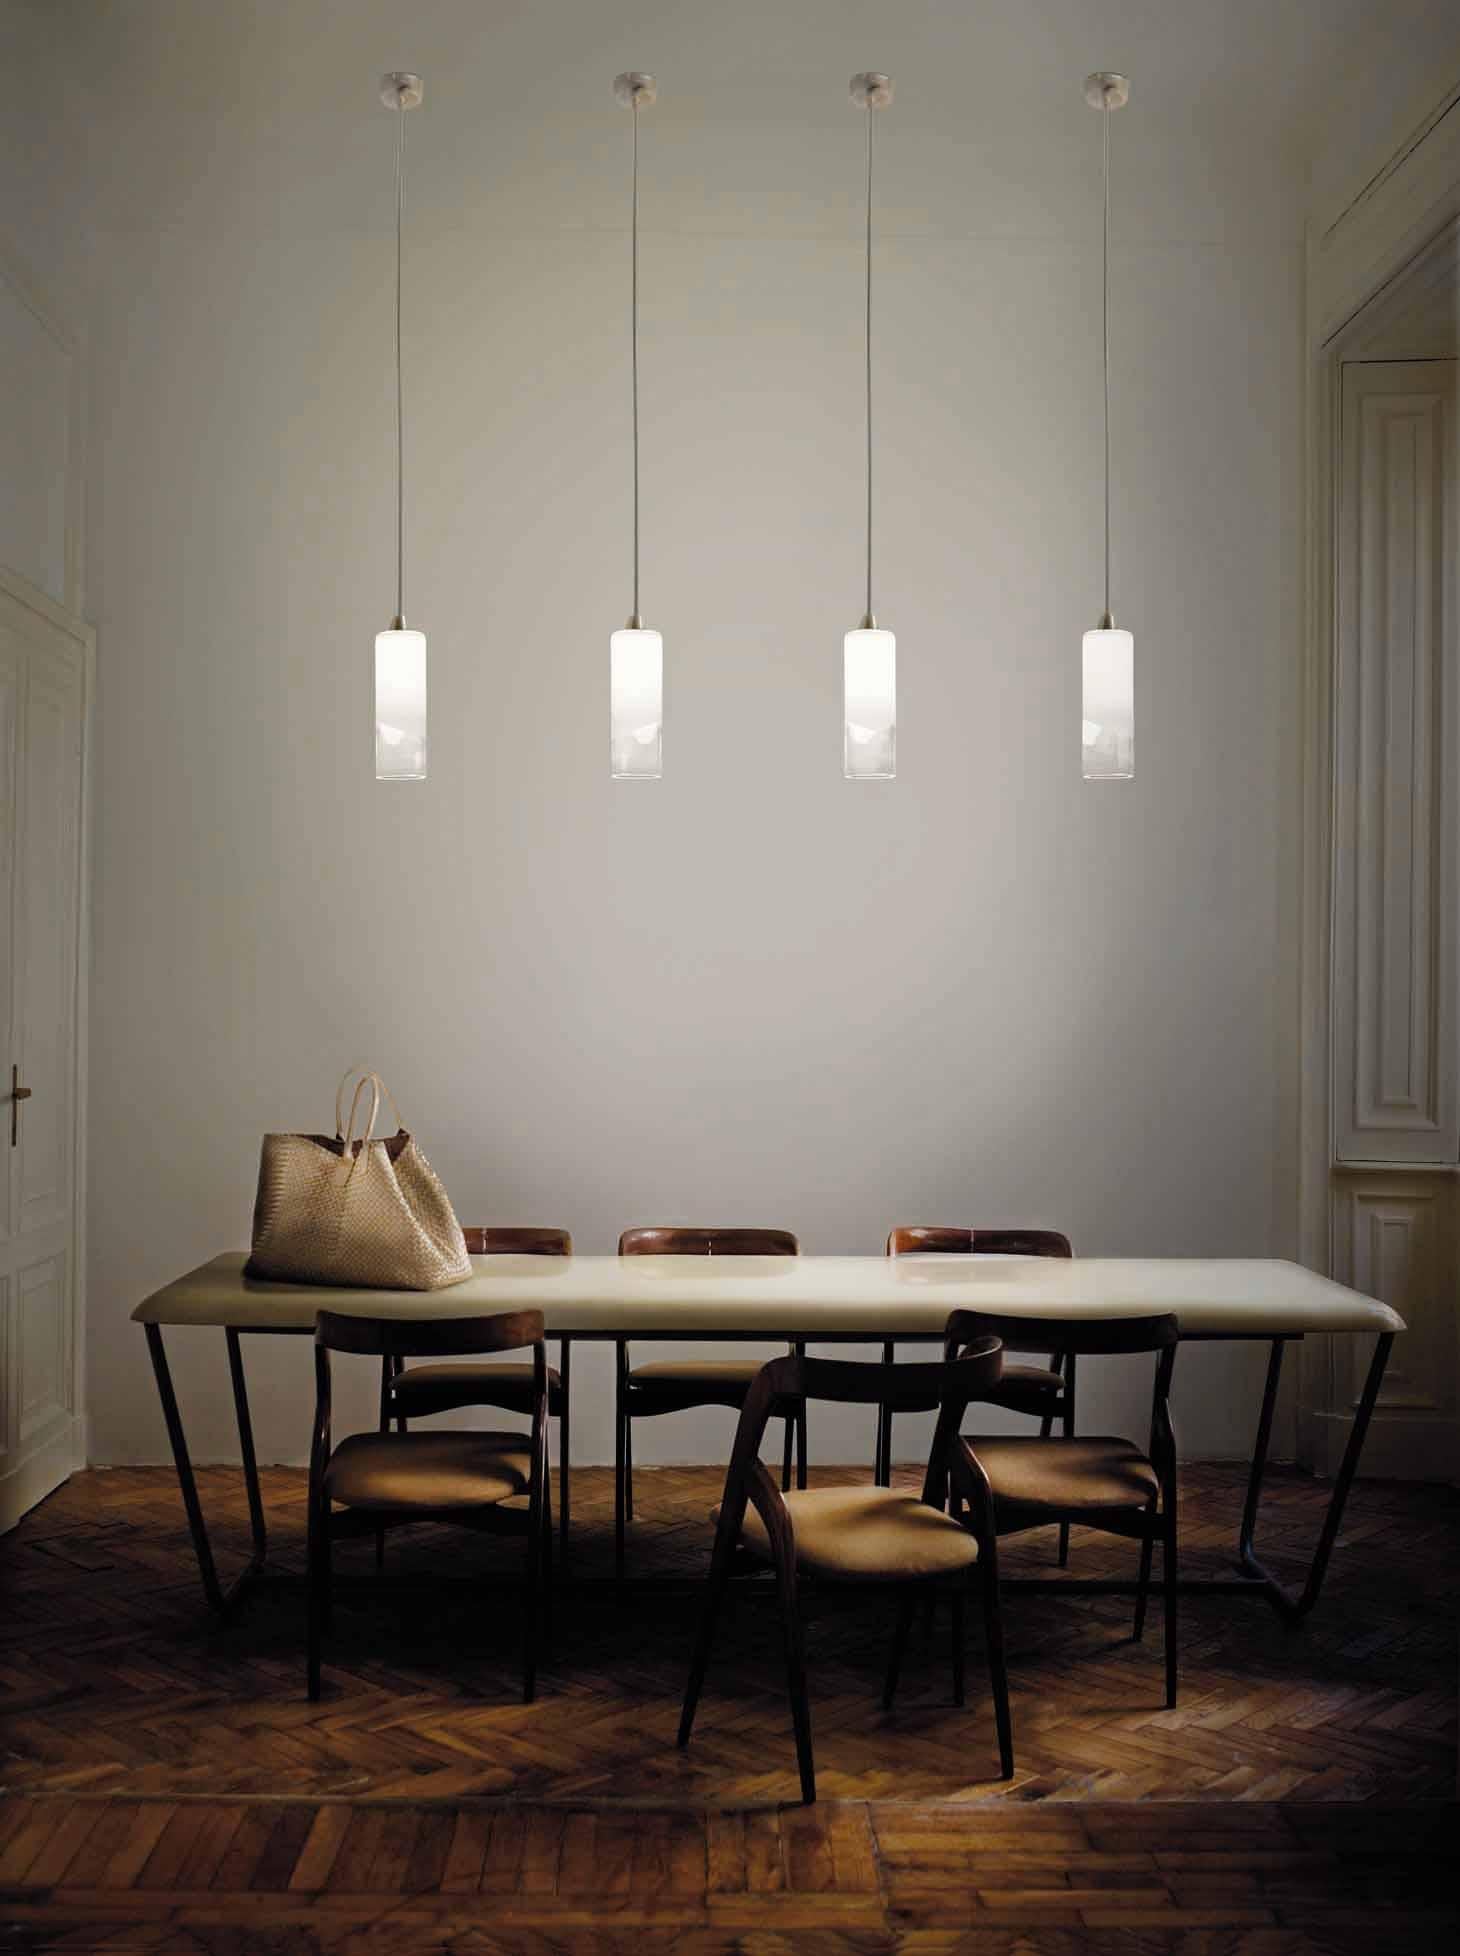 Pendant light with a minimal, unobtrusive design that makes the most of the light source, thanks to the translucent white band inserted in the glass. LED dimmable lighting. Dimensions are in reference to the light fixture and not inclusive of the